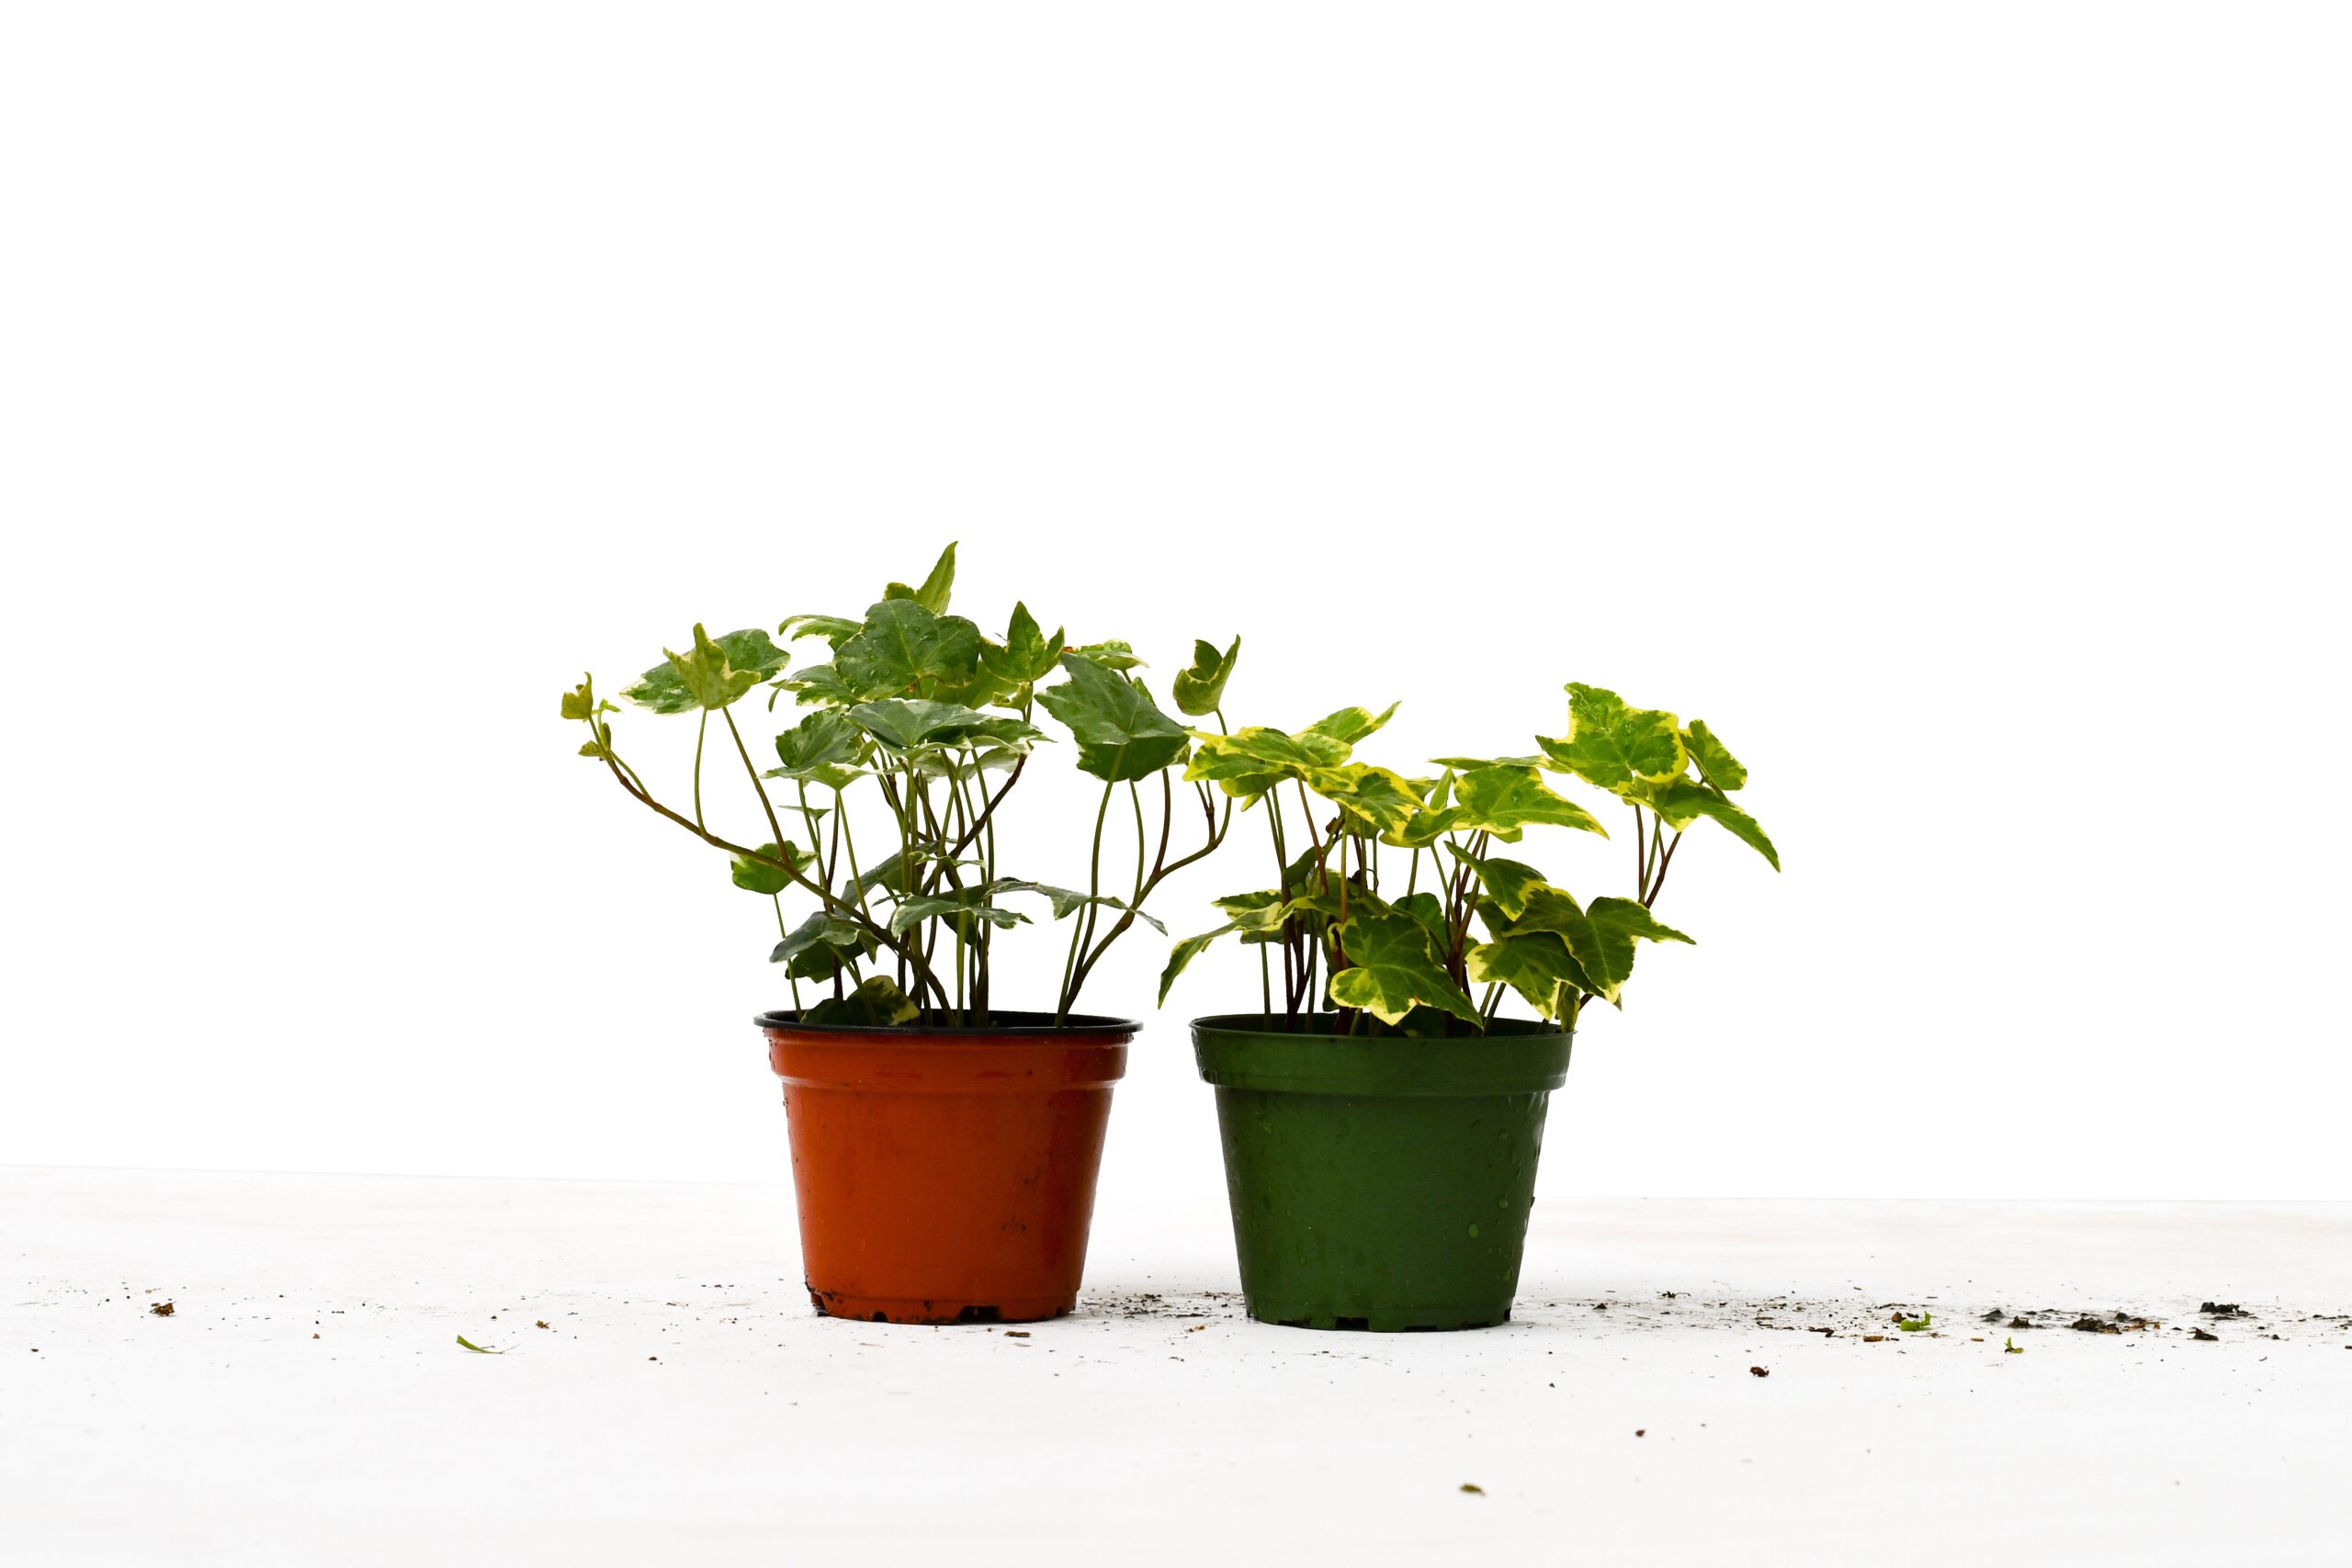 Two potted plants on a white surface at a nursery garden center.